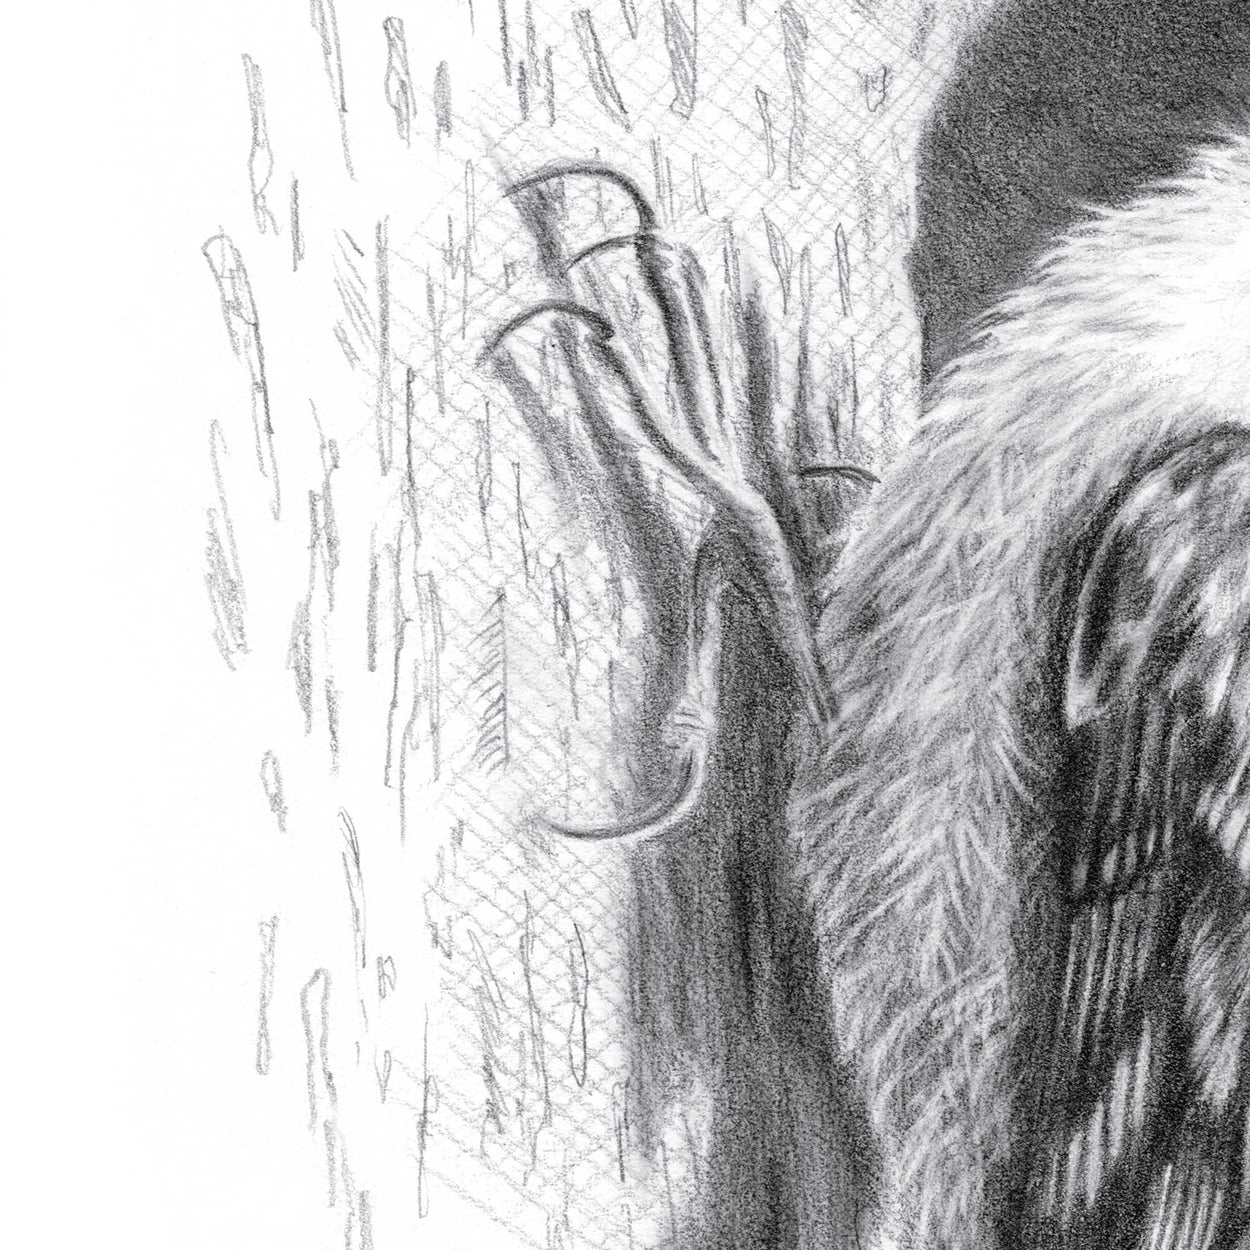 Close-up detail of a pencil drawing of a treecreeper bird's feet and chest